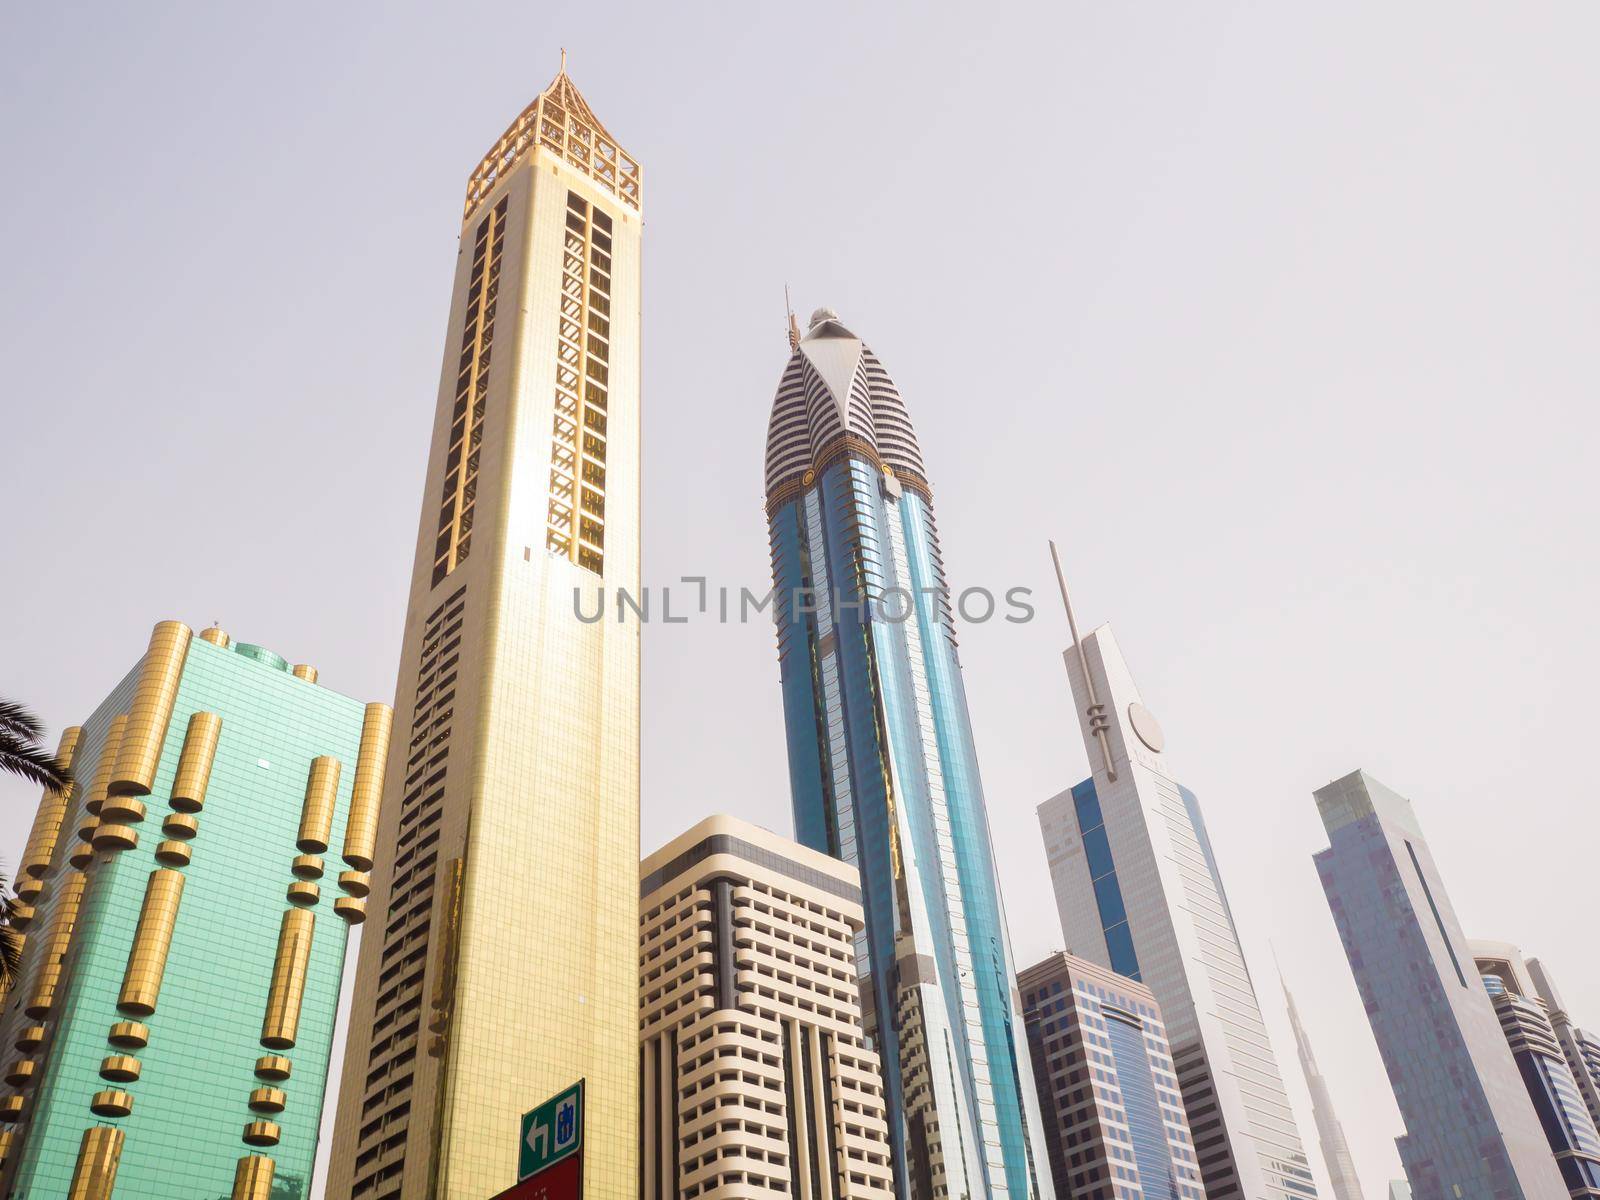 Skyscrapers on Sheikh Zayed Road in Dubai